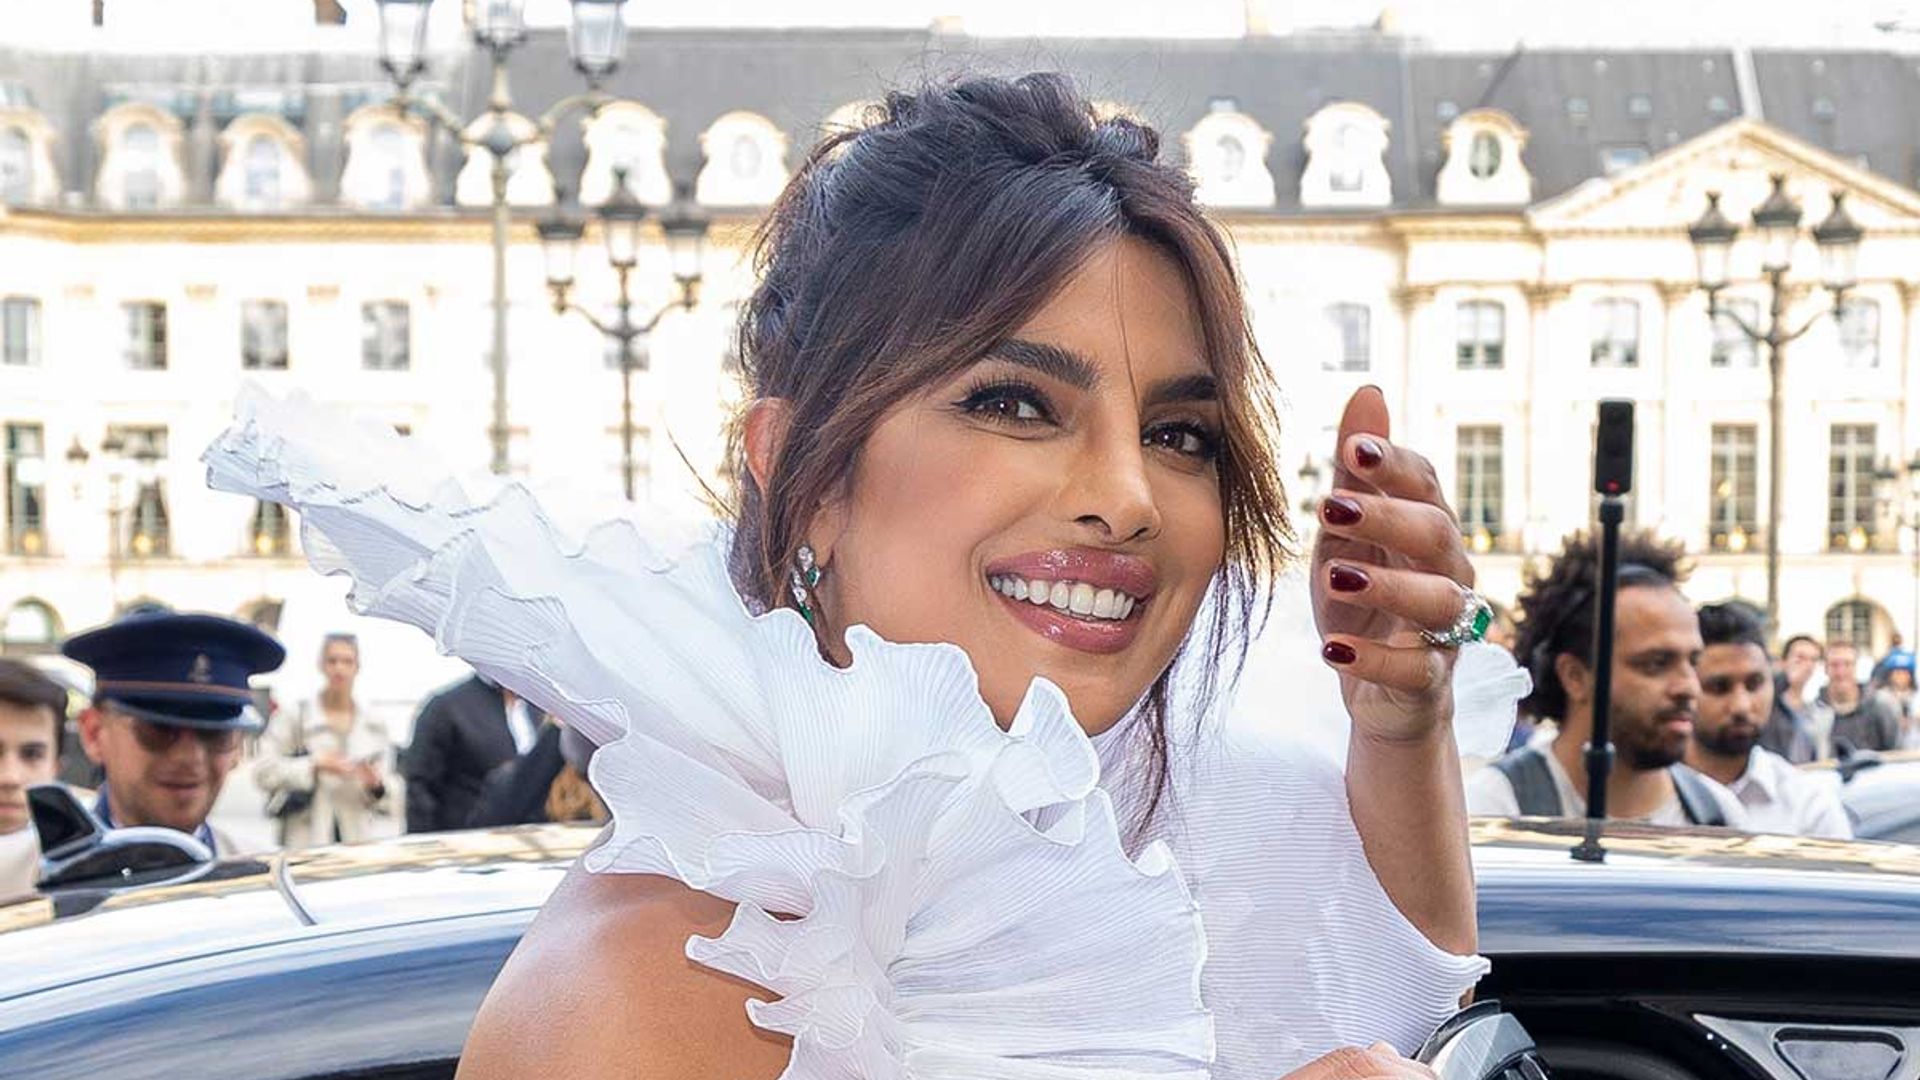 Priyanka Chopra rocks the red carpet in a black and white gown at the  premier of 'The Sky Is Pink' at TIFF | Hindi Movie News - Times of India